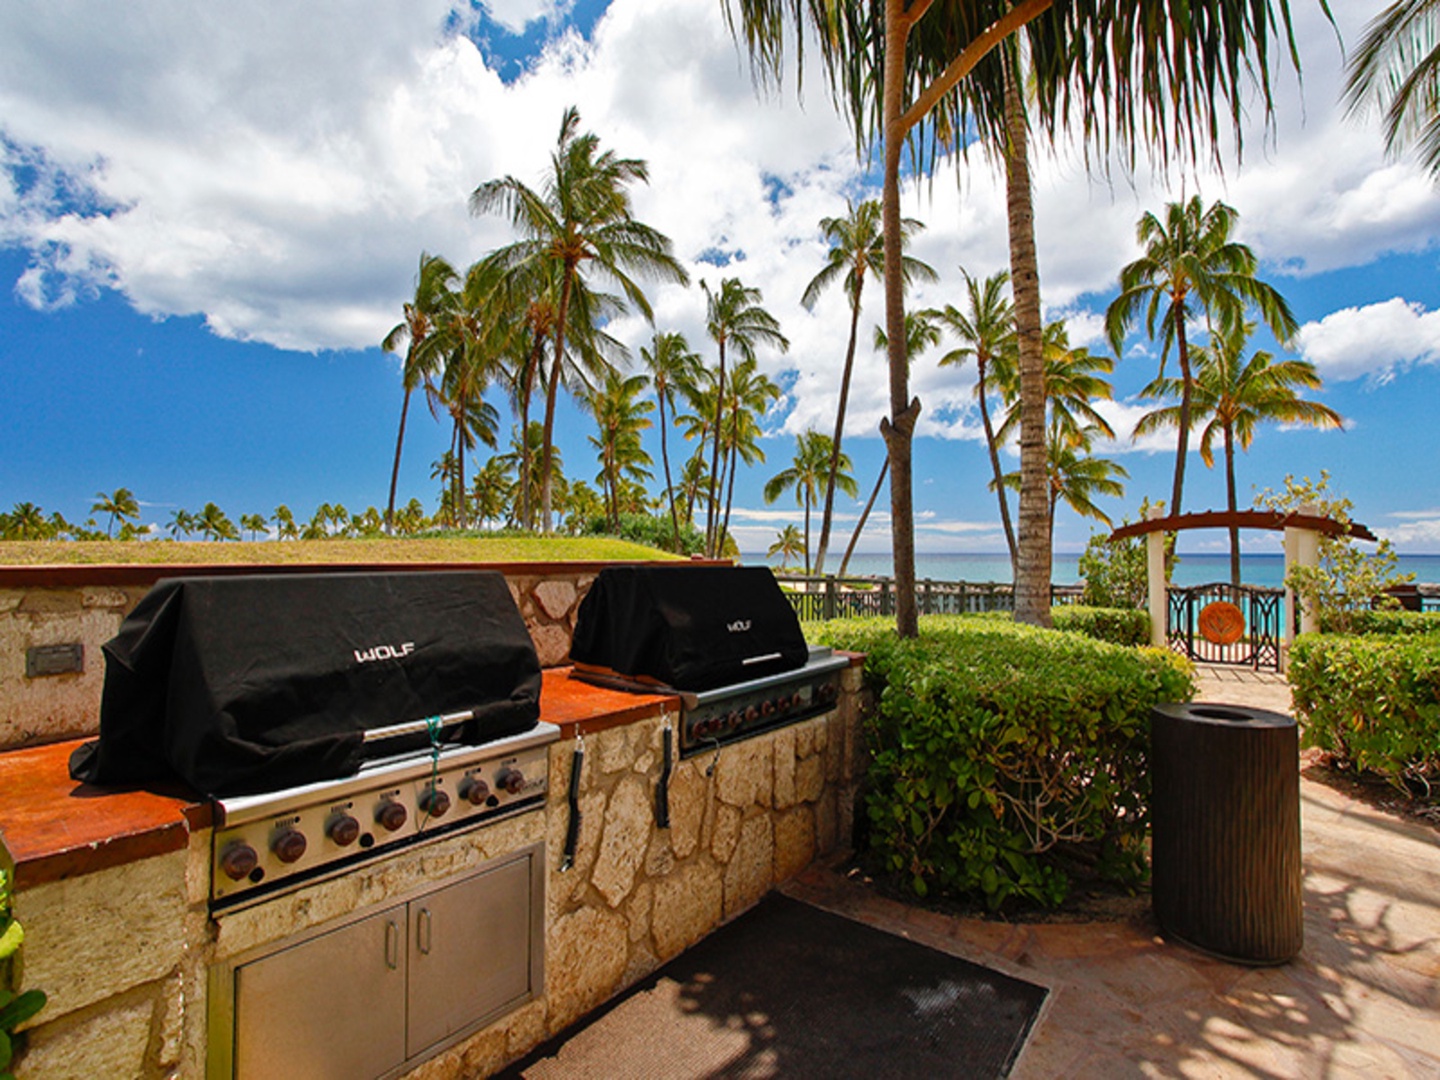 Kapolei Vacation Rentals, Ko Olina Beach Villas B706 - The BBQ grills are set up for happy days on the island.